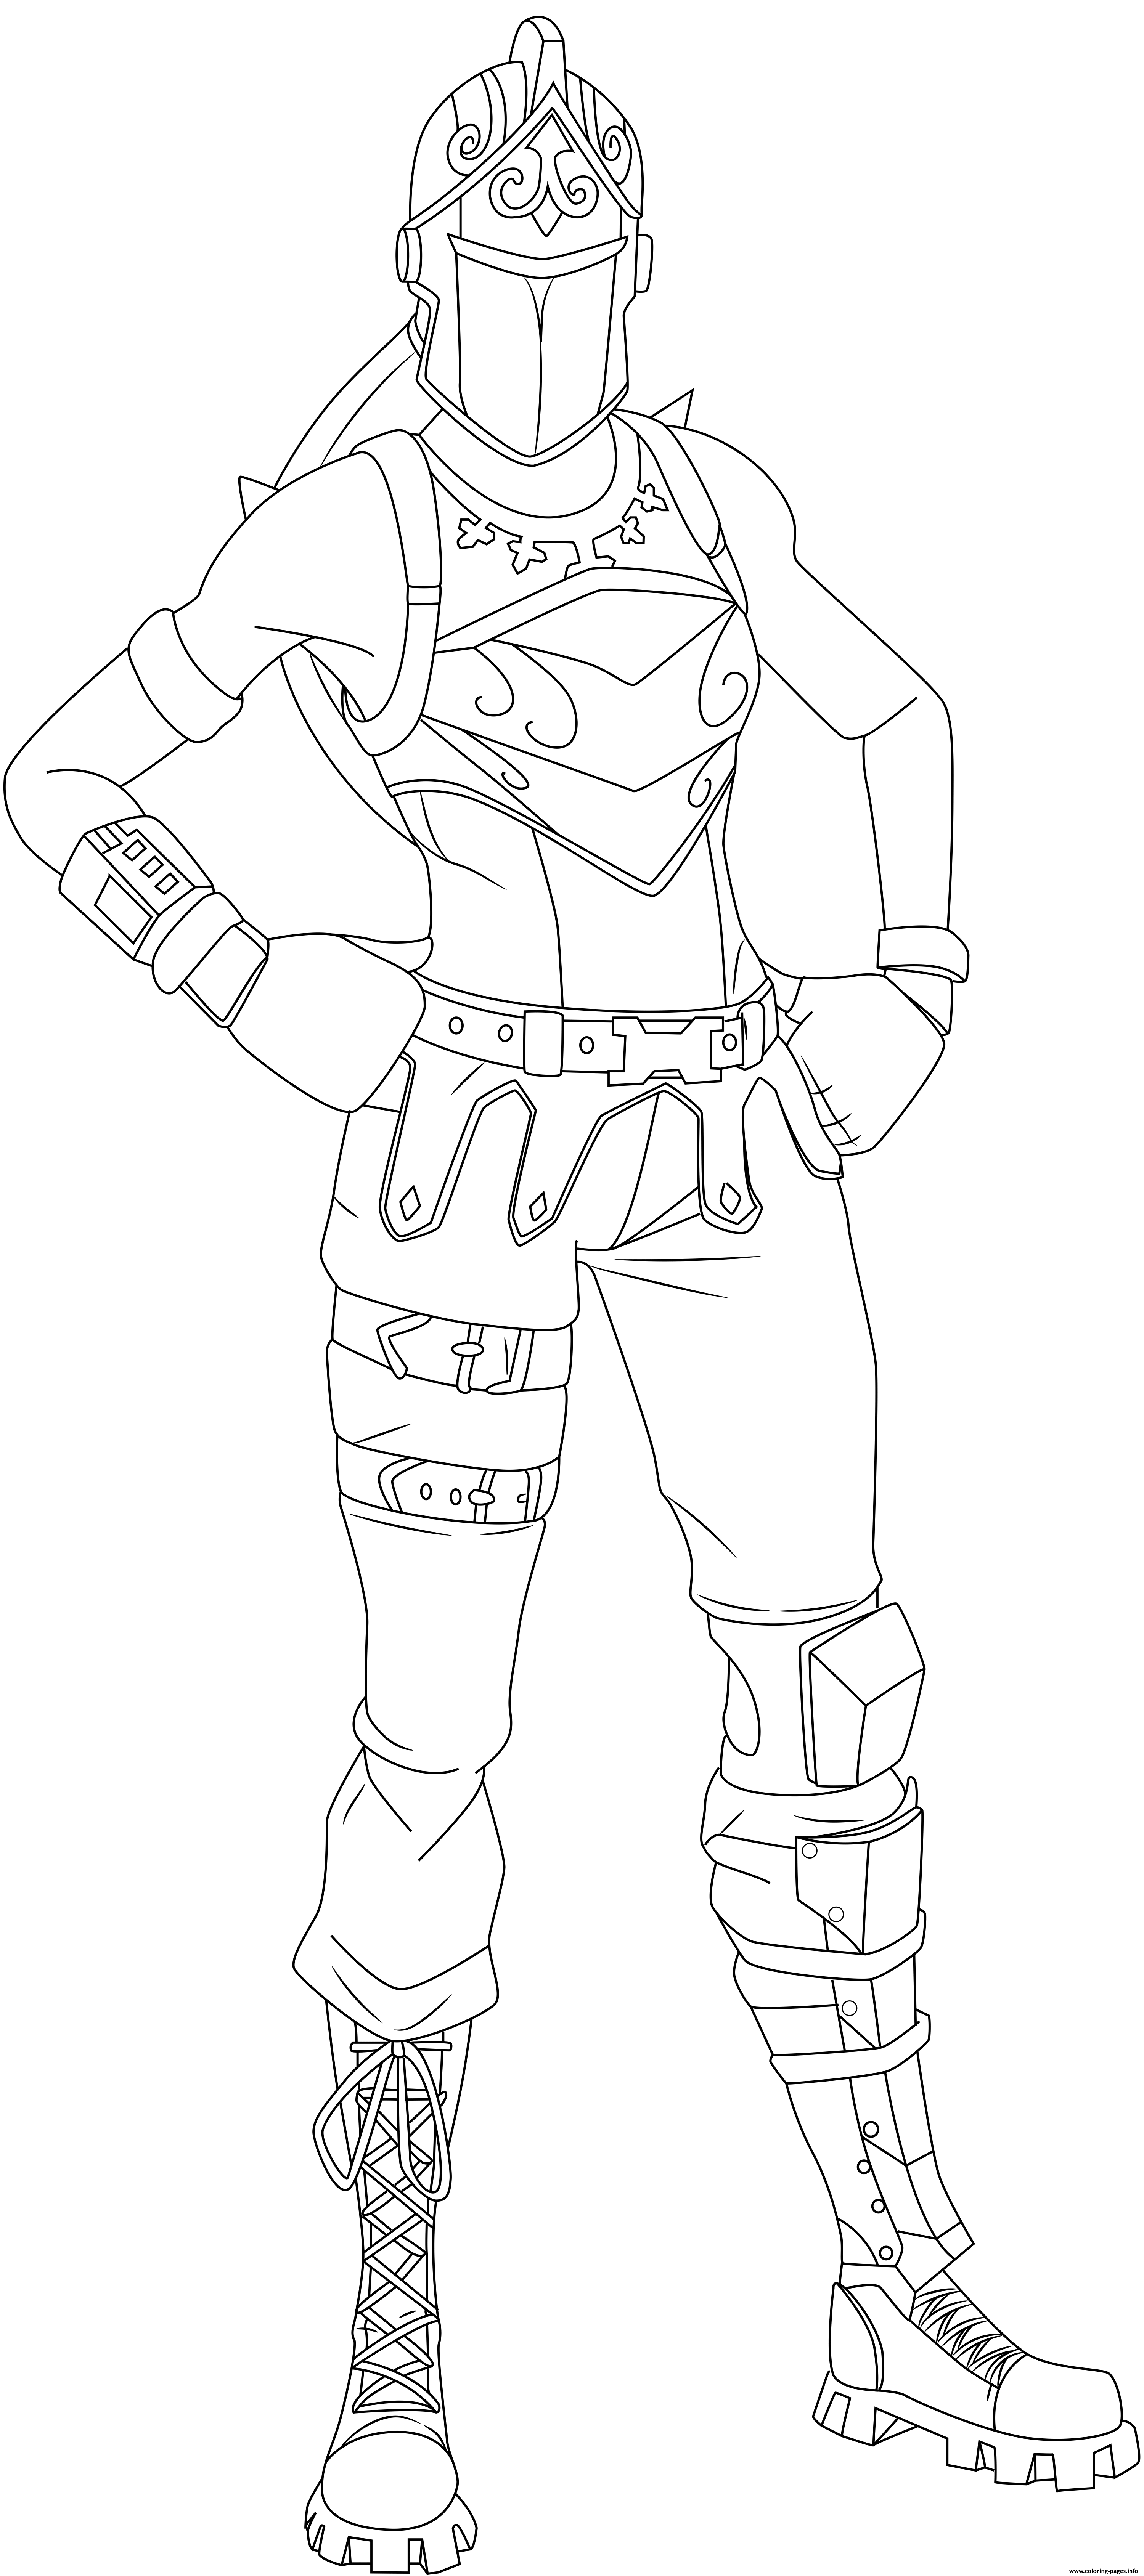 Fortnite Skins Coloring Pages Printable